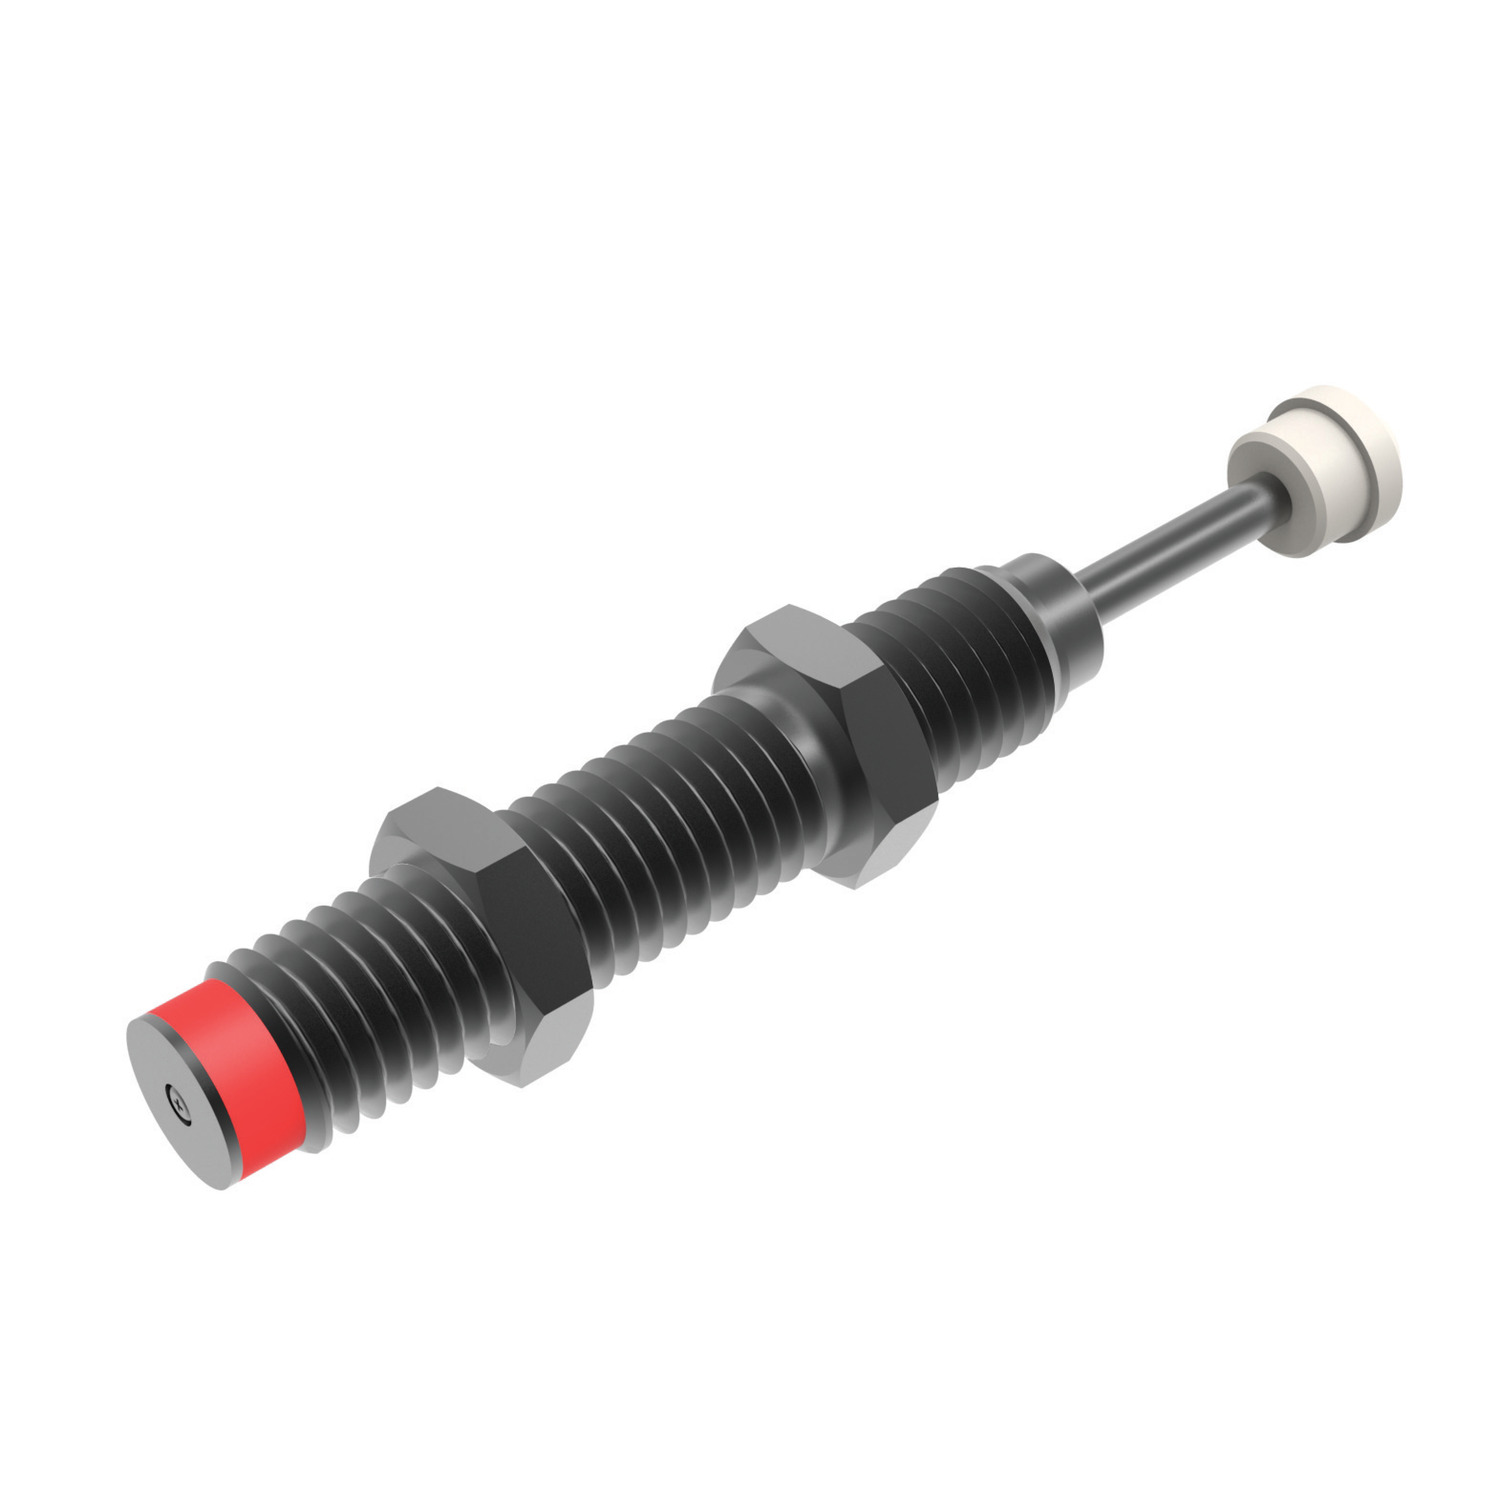 Product 68003, Shock Absorbers, Self Compensating M25 - M36, non-adjustable / 